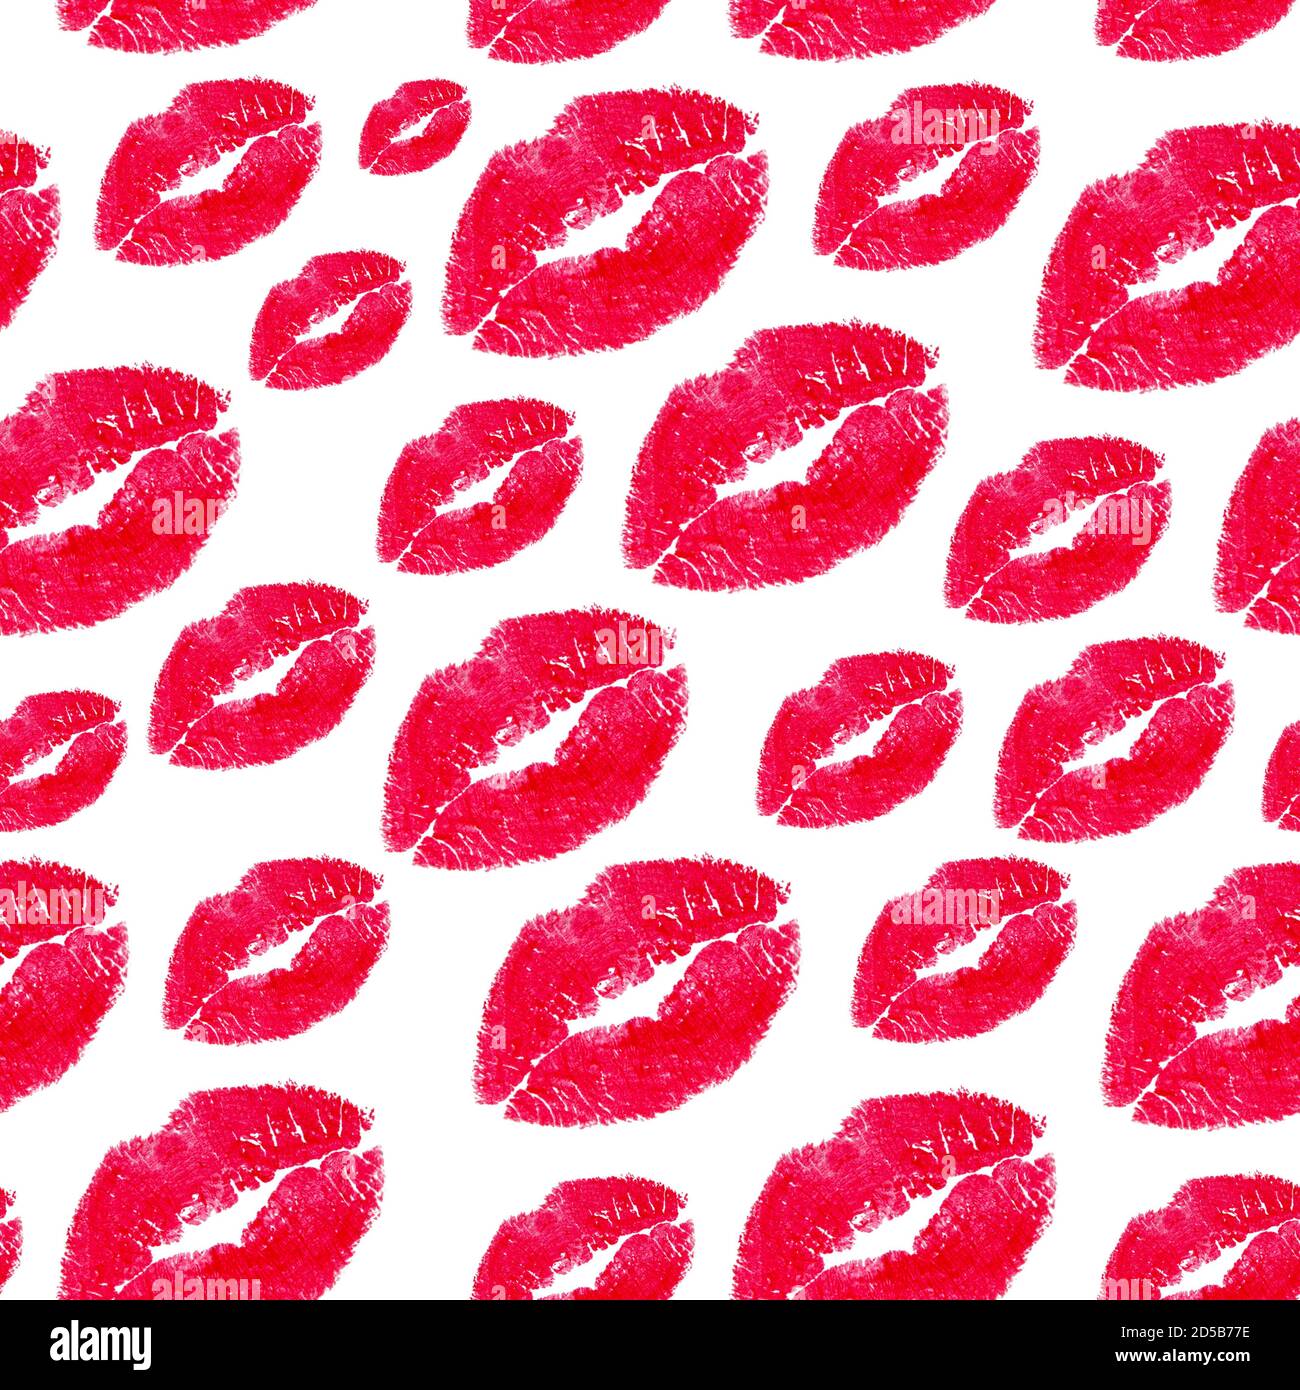 Seamless pattern kiss red lipstick on isolated white background. Stock Photo